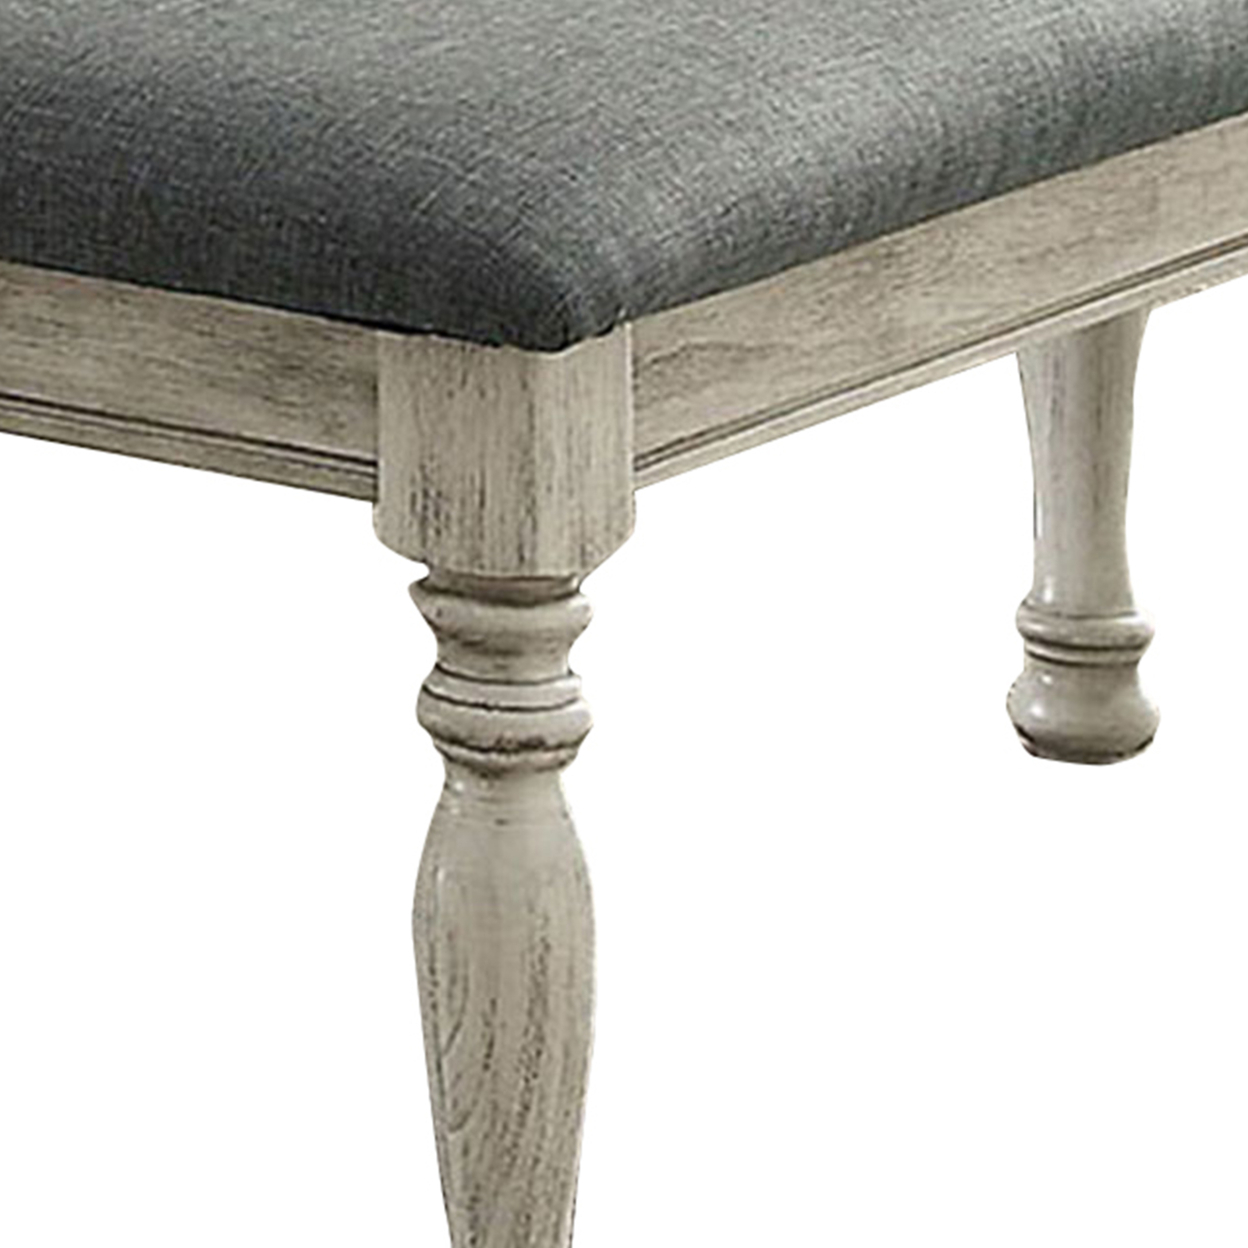 Transitional Fabric Upholstered Wooden Bench, Gray And White- Saltoro Sherpi